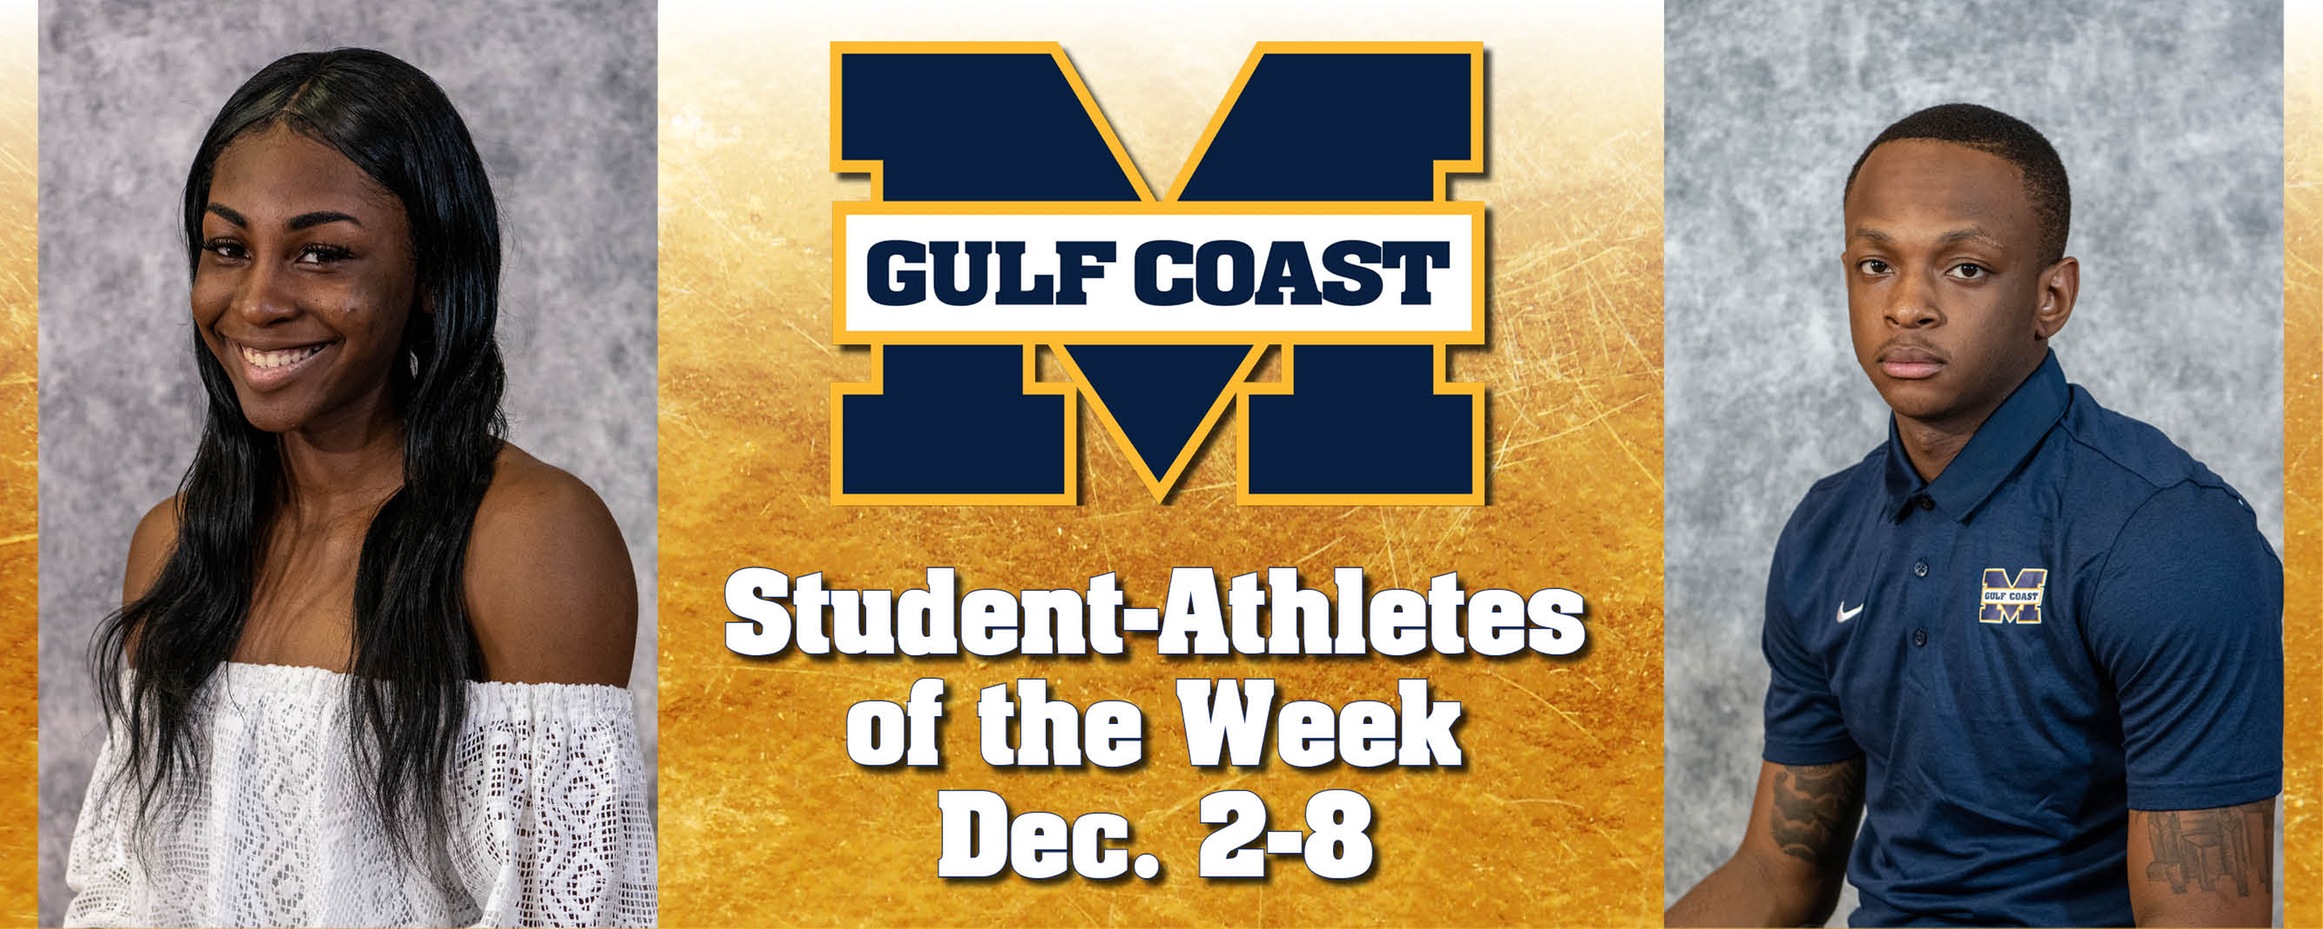 Jackson, Minter named MGCCC Student-Athletes of the Week